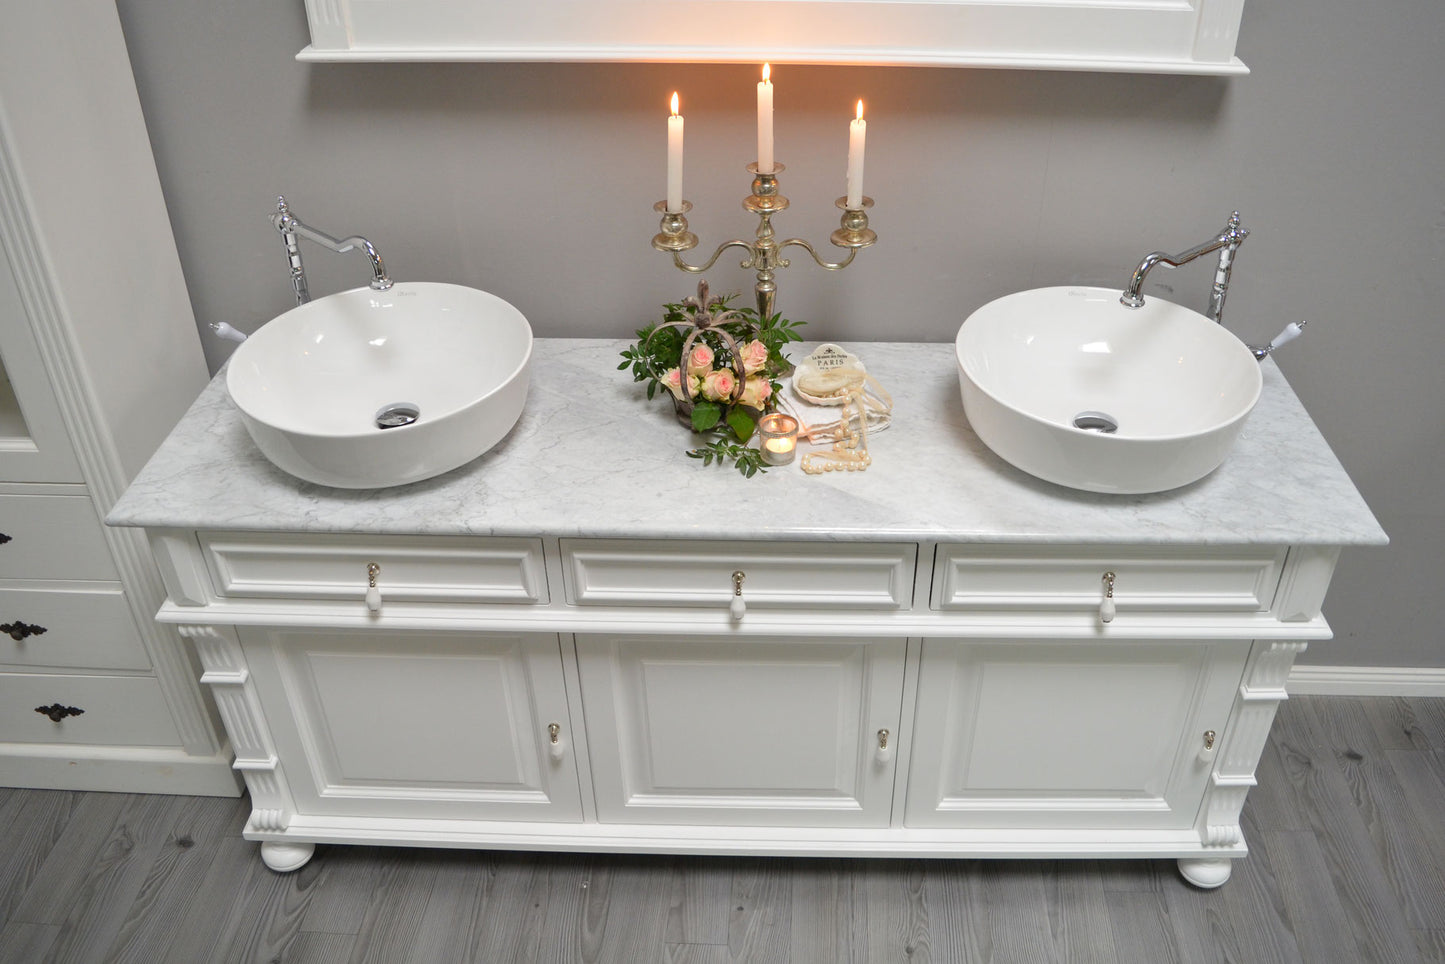 "Charante" - MARMOR country house double washbasin